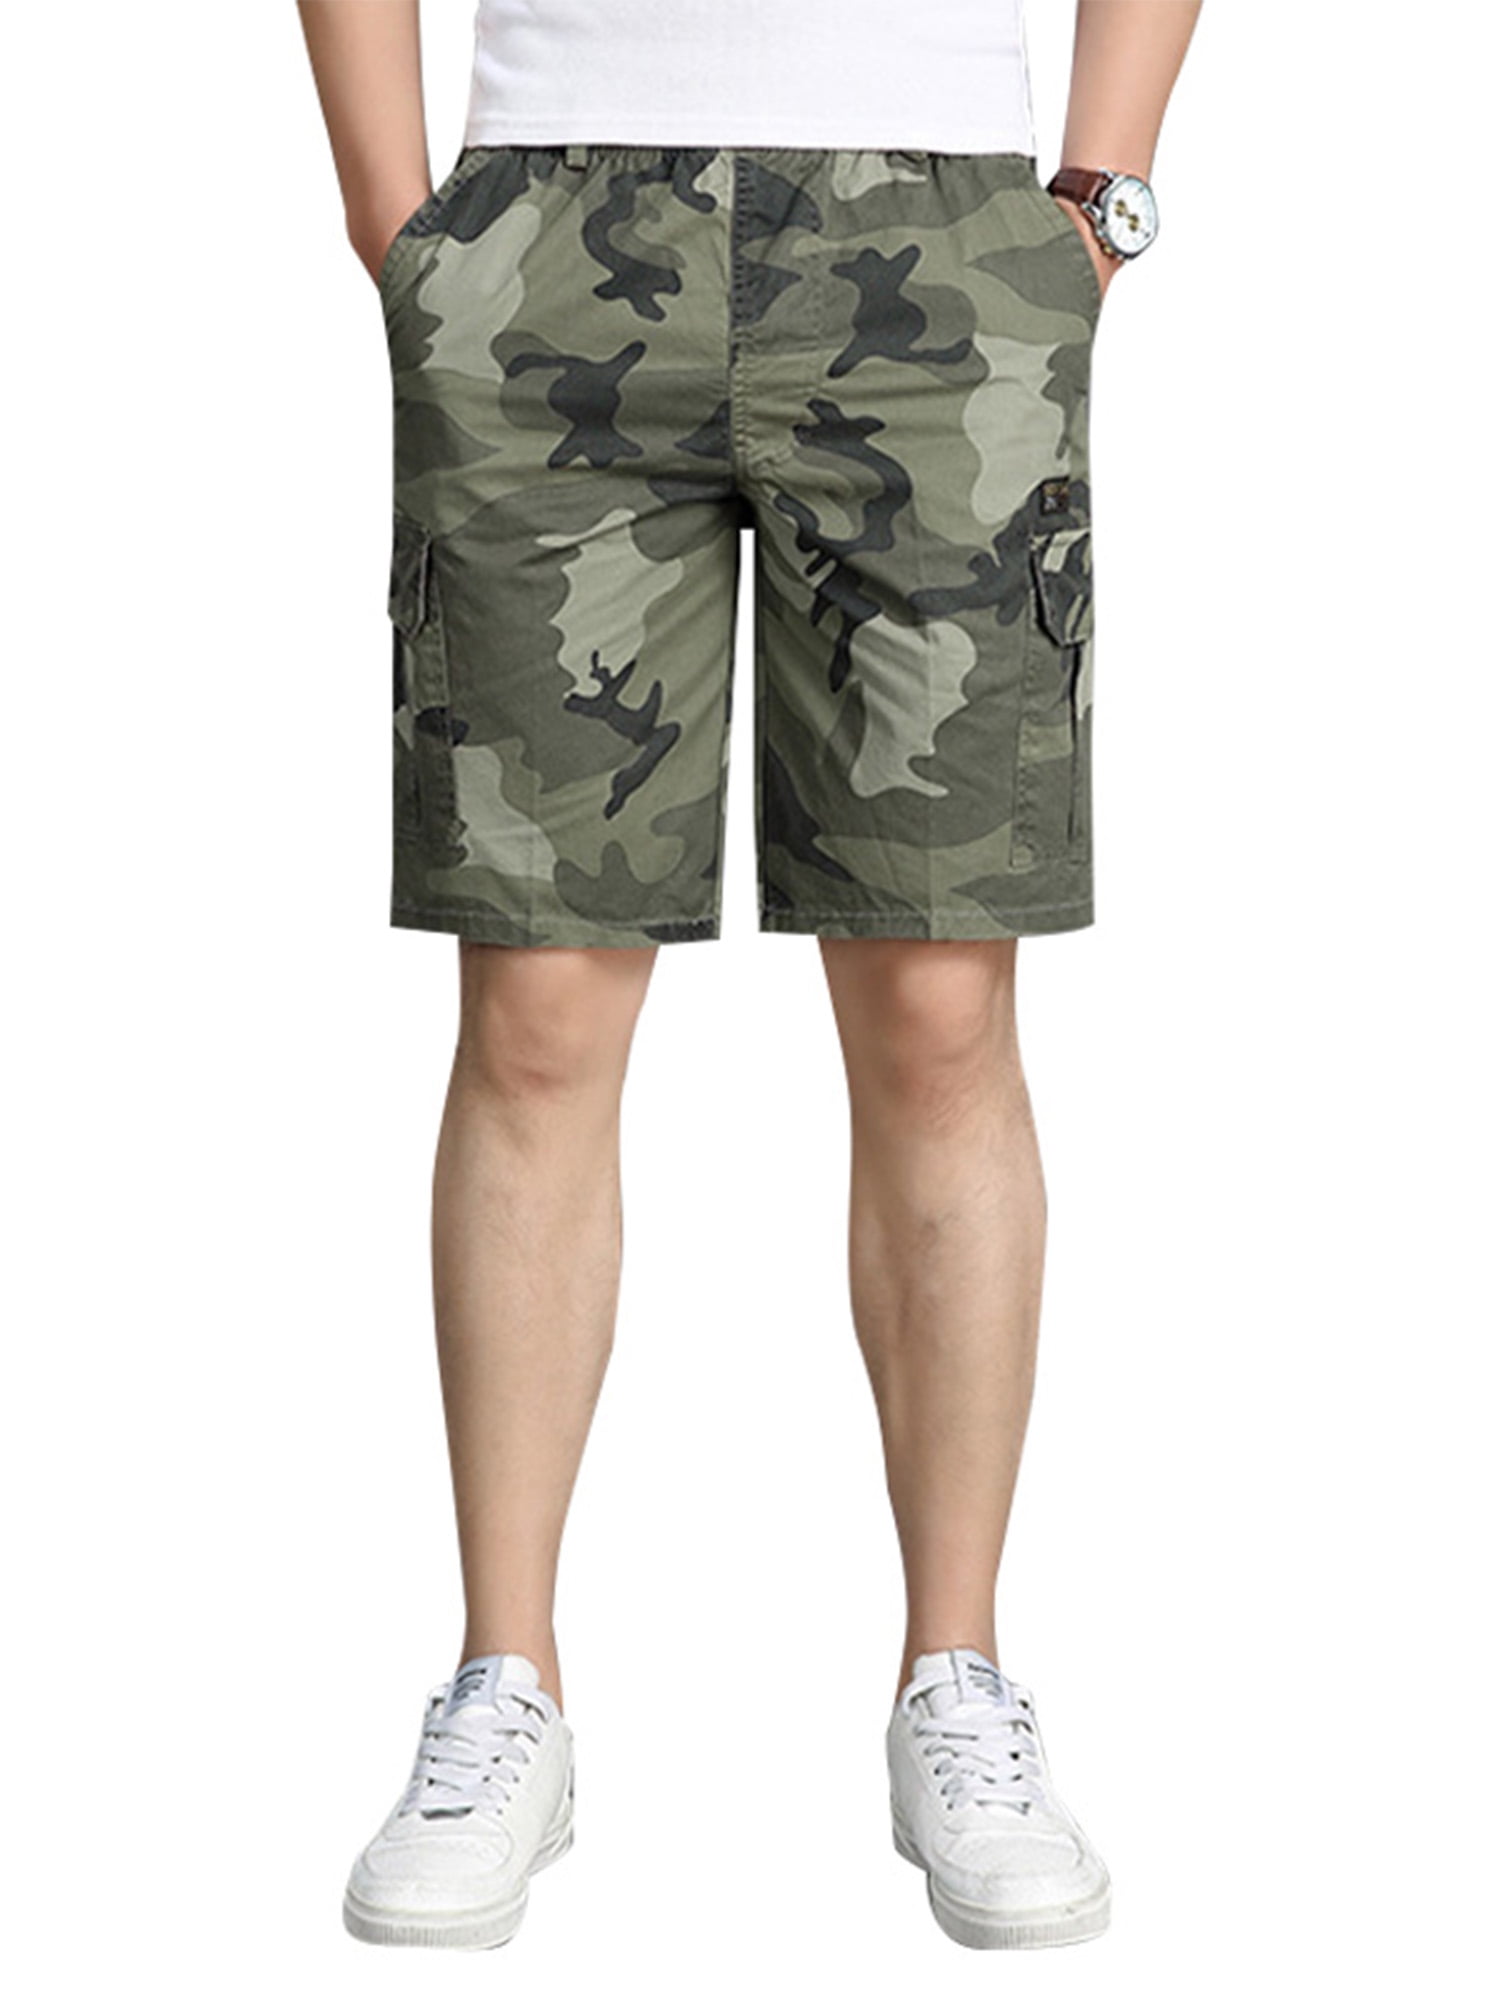 MENS 3/4 SHORTS ELASTICATED JUNGLE PRINT CARGO COMBAT CAMOUFLAGE TROUSERS PANTS